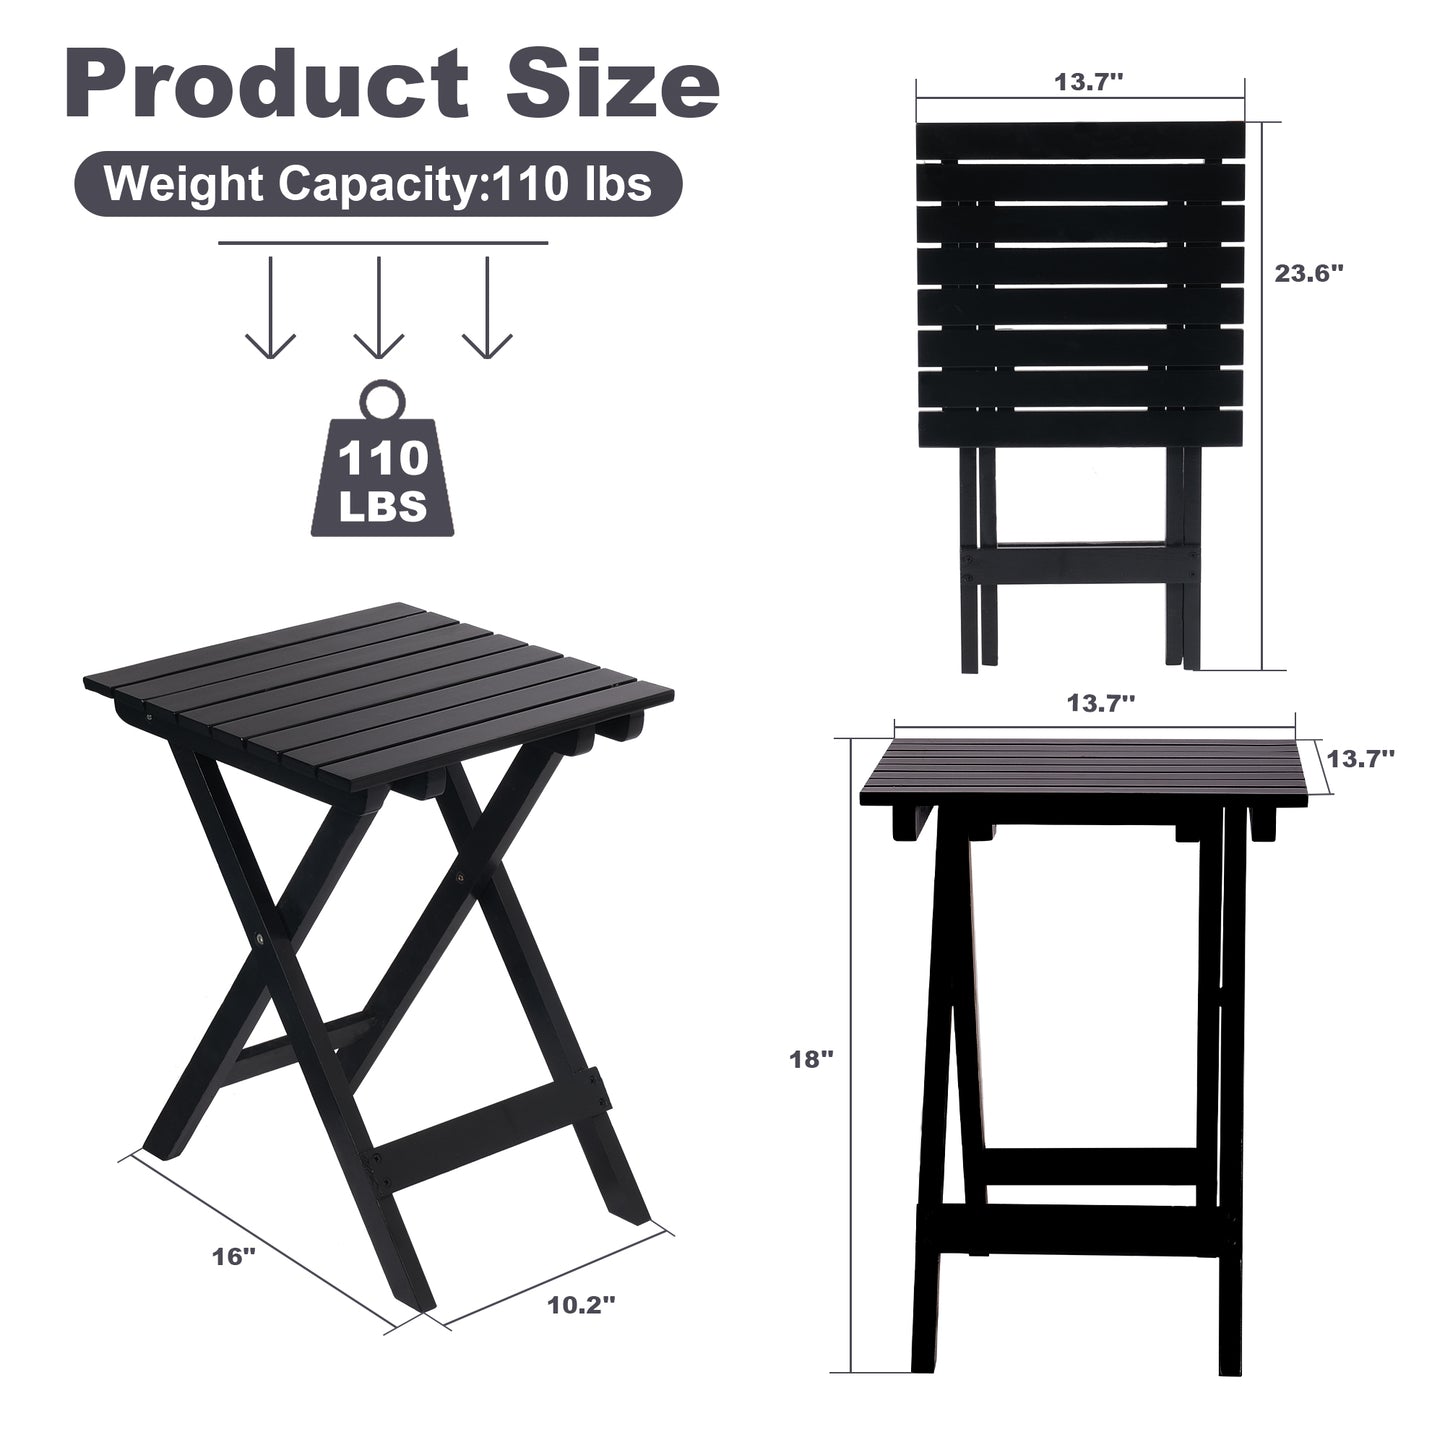 13.7" Square Outdoor Patio Folding Side Table Wood Portable End Table, Black